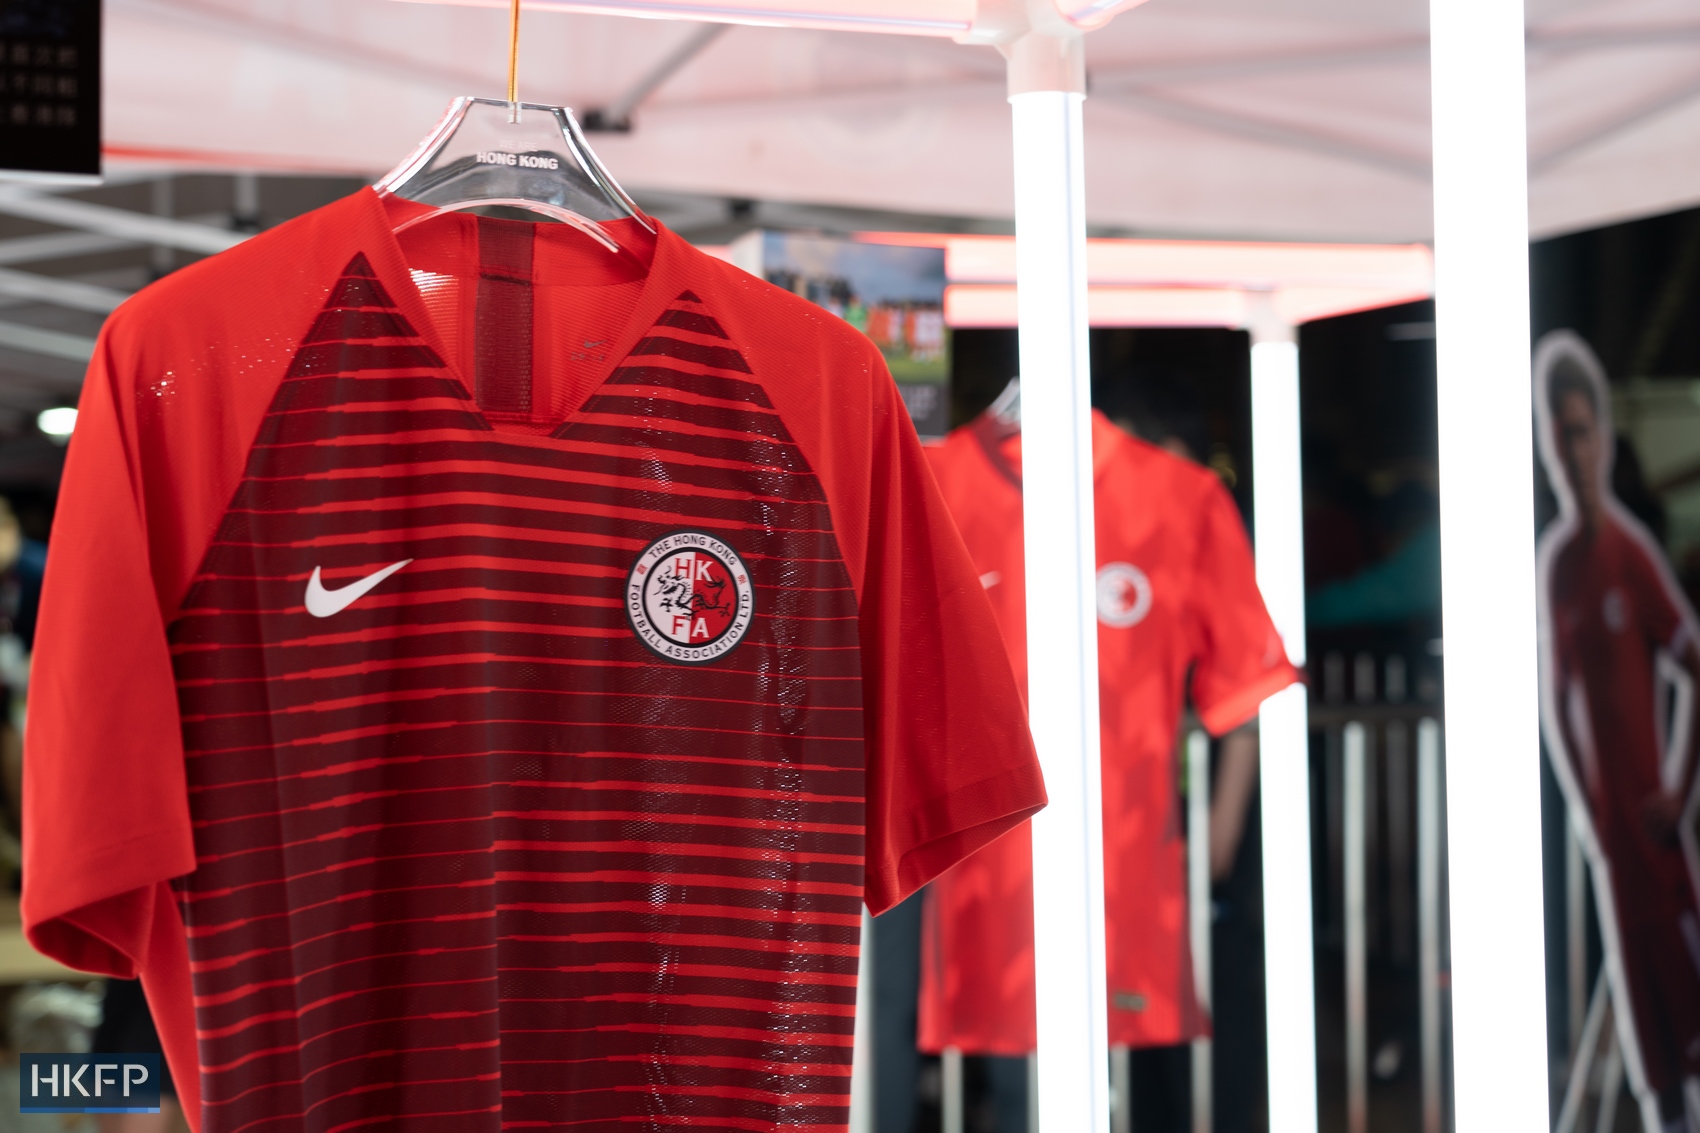 Previous versions of the Hong Kong football team jerseys on display at the Mong Kok Stadium on March 23, 2023. 